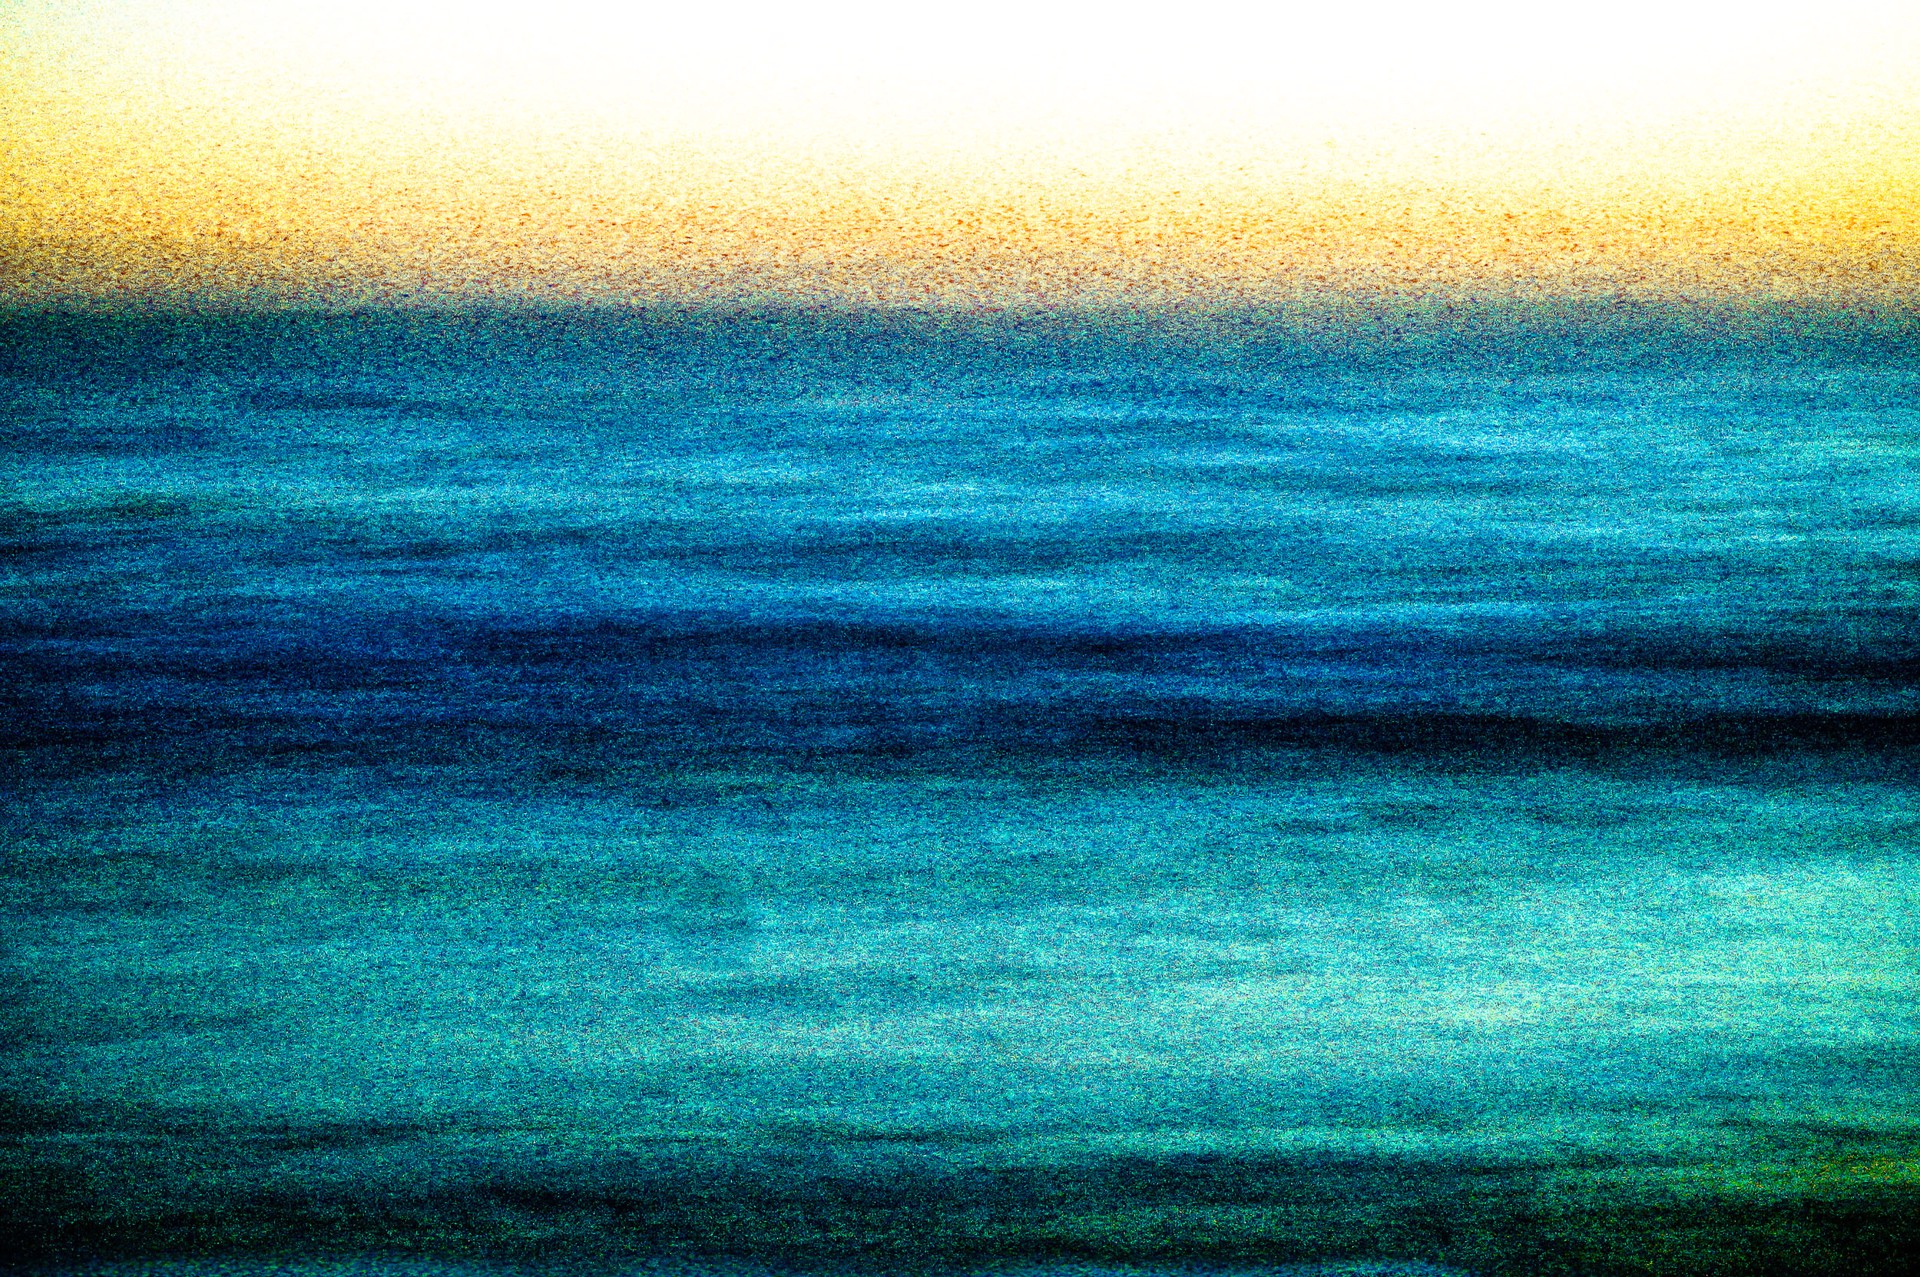 Seascape no. 0058 by Sol Hill